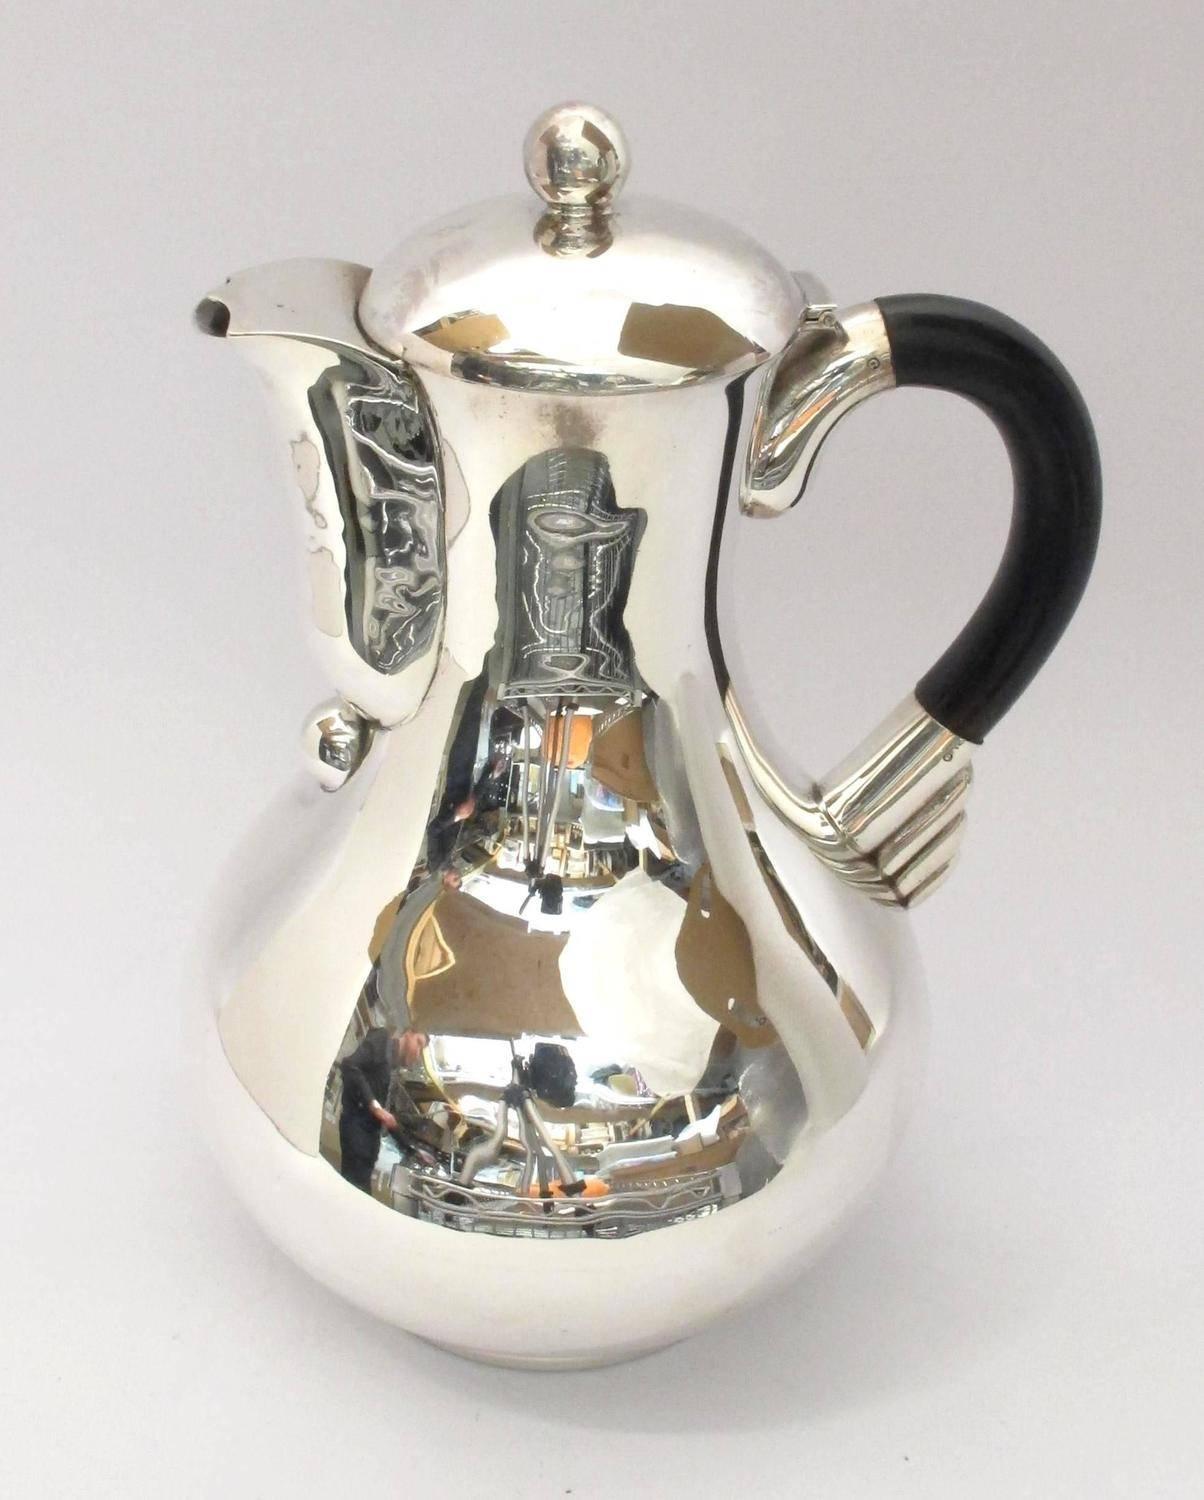 Stunning Art Deco sterling silver tea and coffee set by Hector Aguilar 1948-62. Found in 